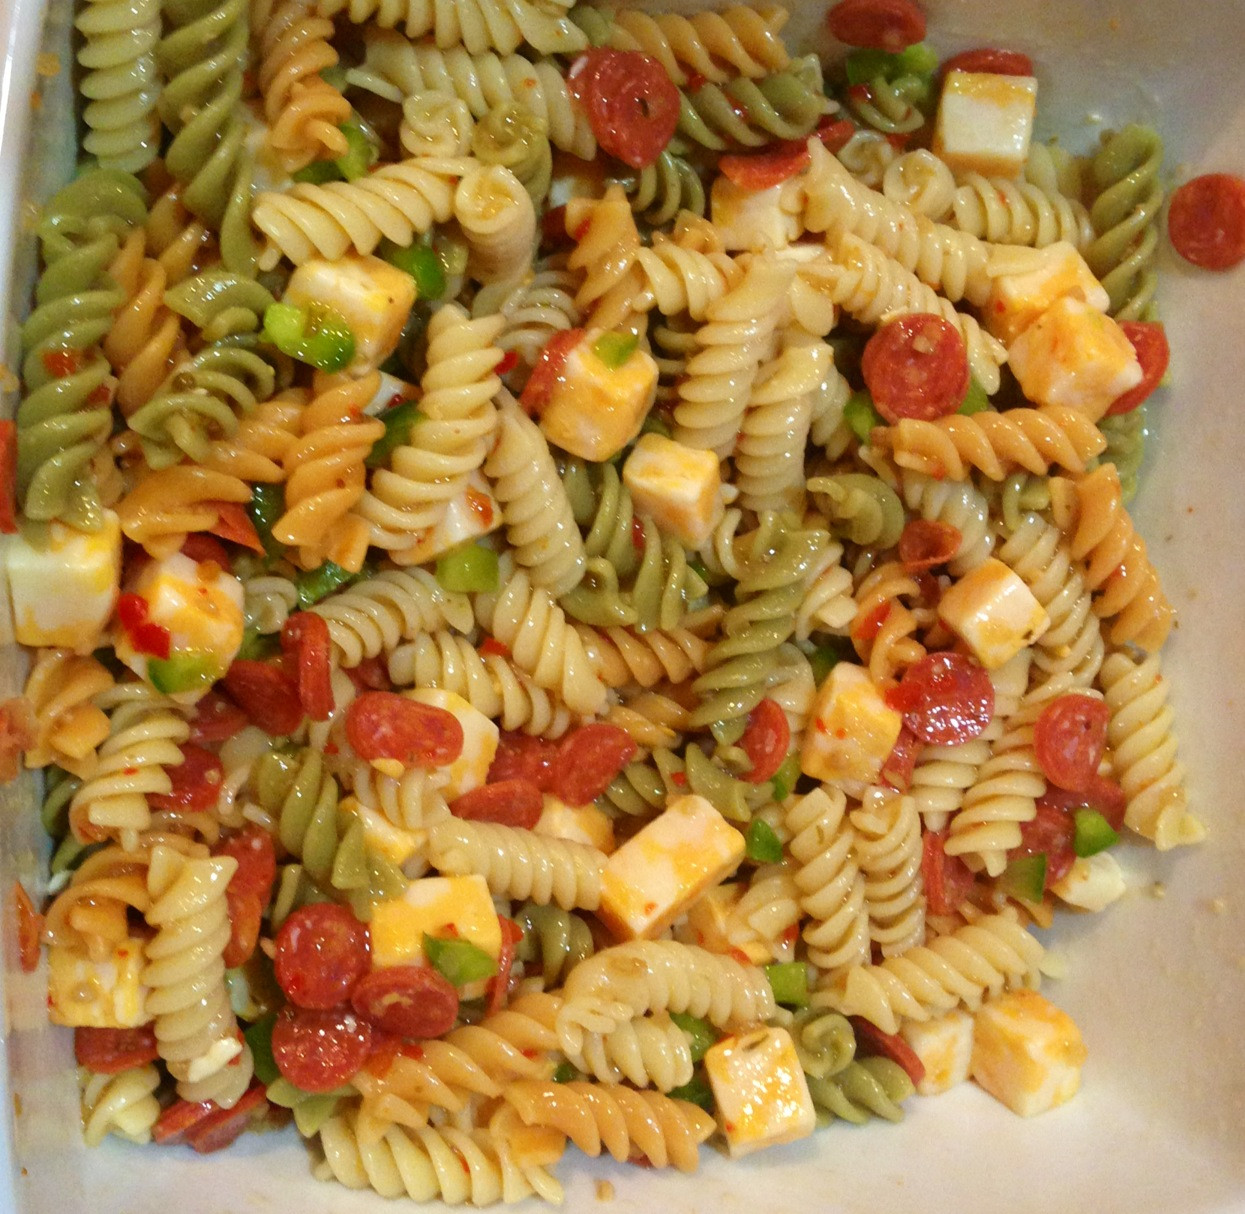 Macaroni Salad With Cheese Cubes
 I M NOT MESSY I M JUST BUSY Pasta Salad Recipe